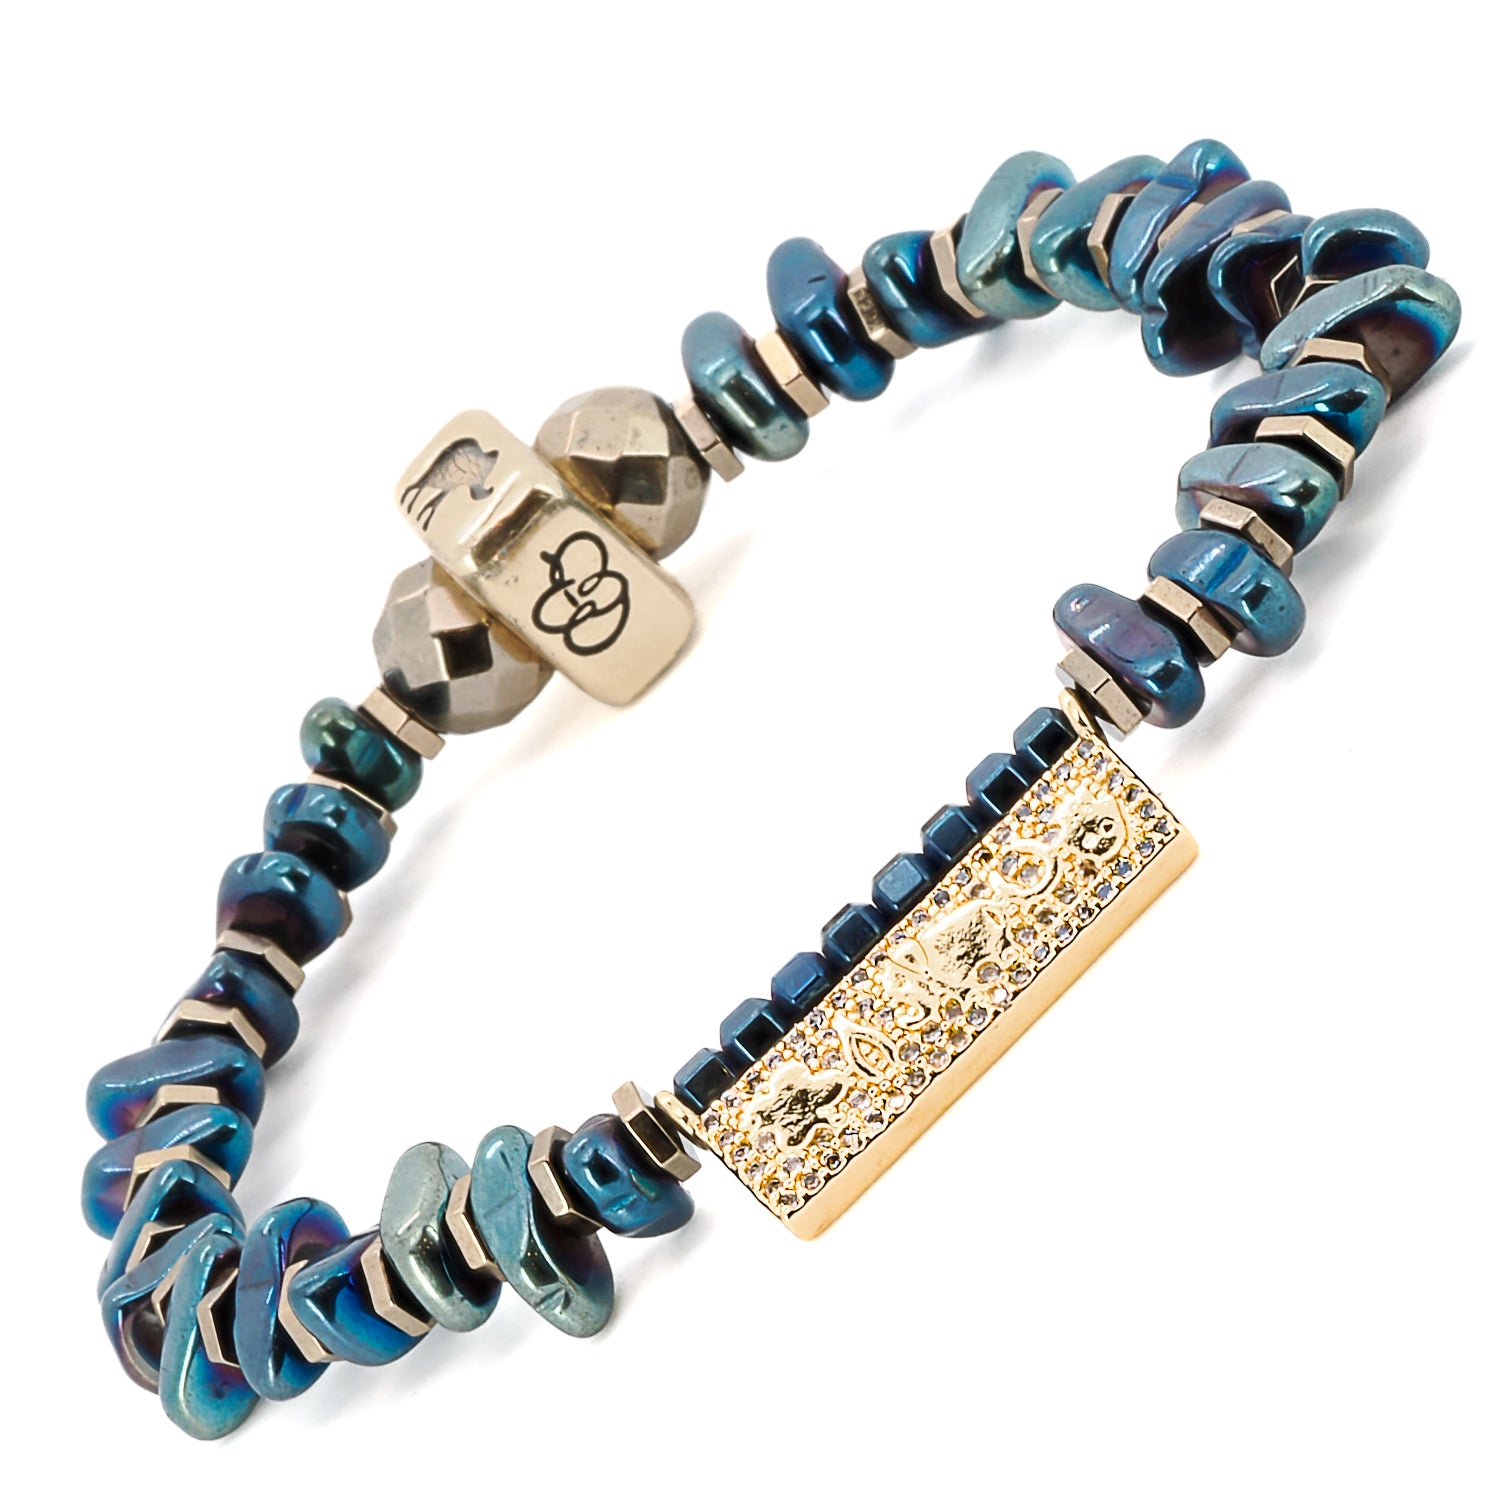 The Protection &amp; Luck Blue Hematite Bracelet is a captivating and meaningful accessory that brings protection and luck on your journey.